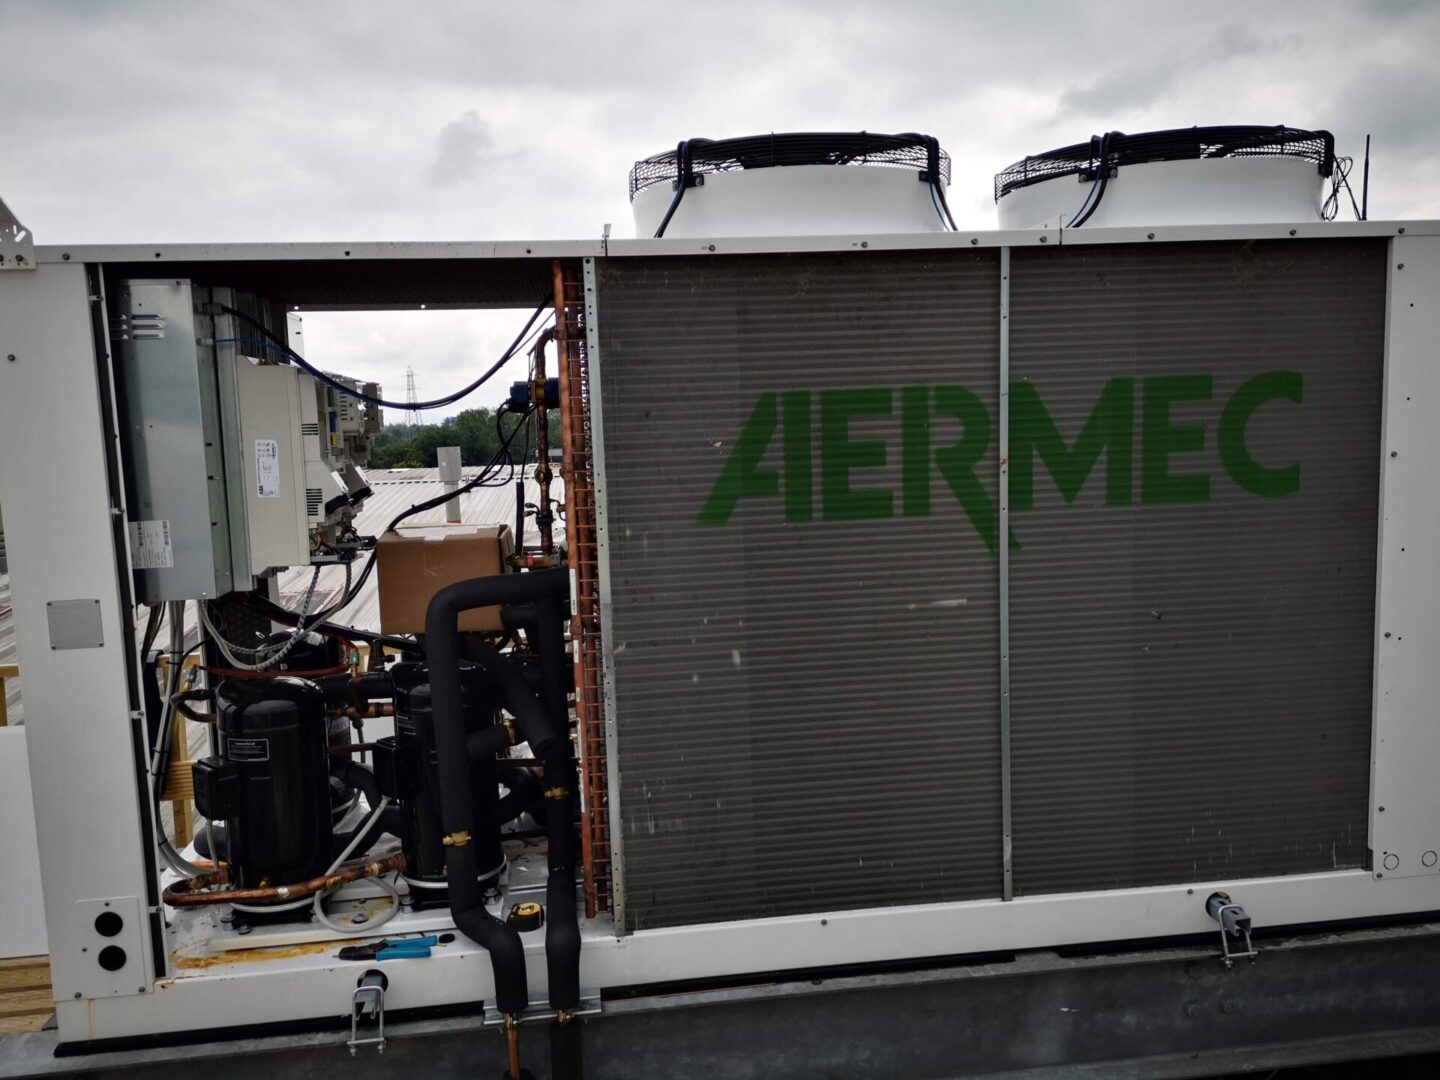 Inside image of an aermec machine with some wires